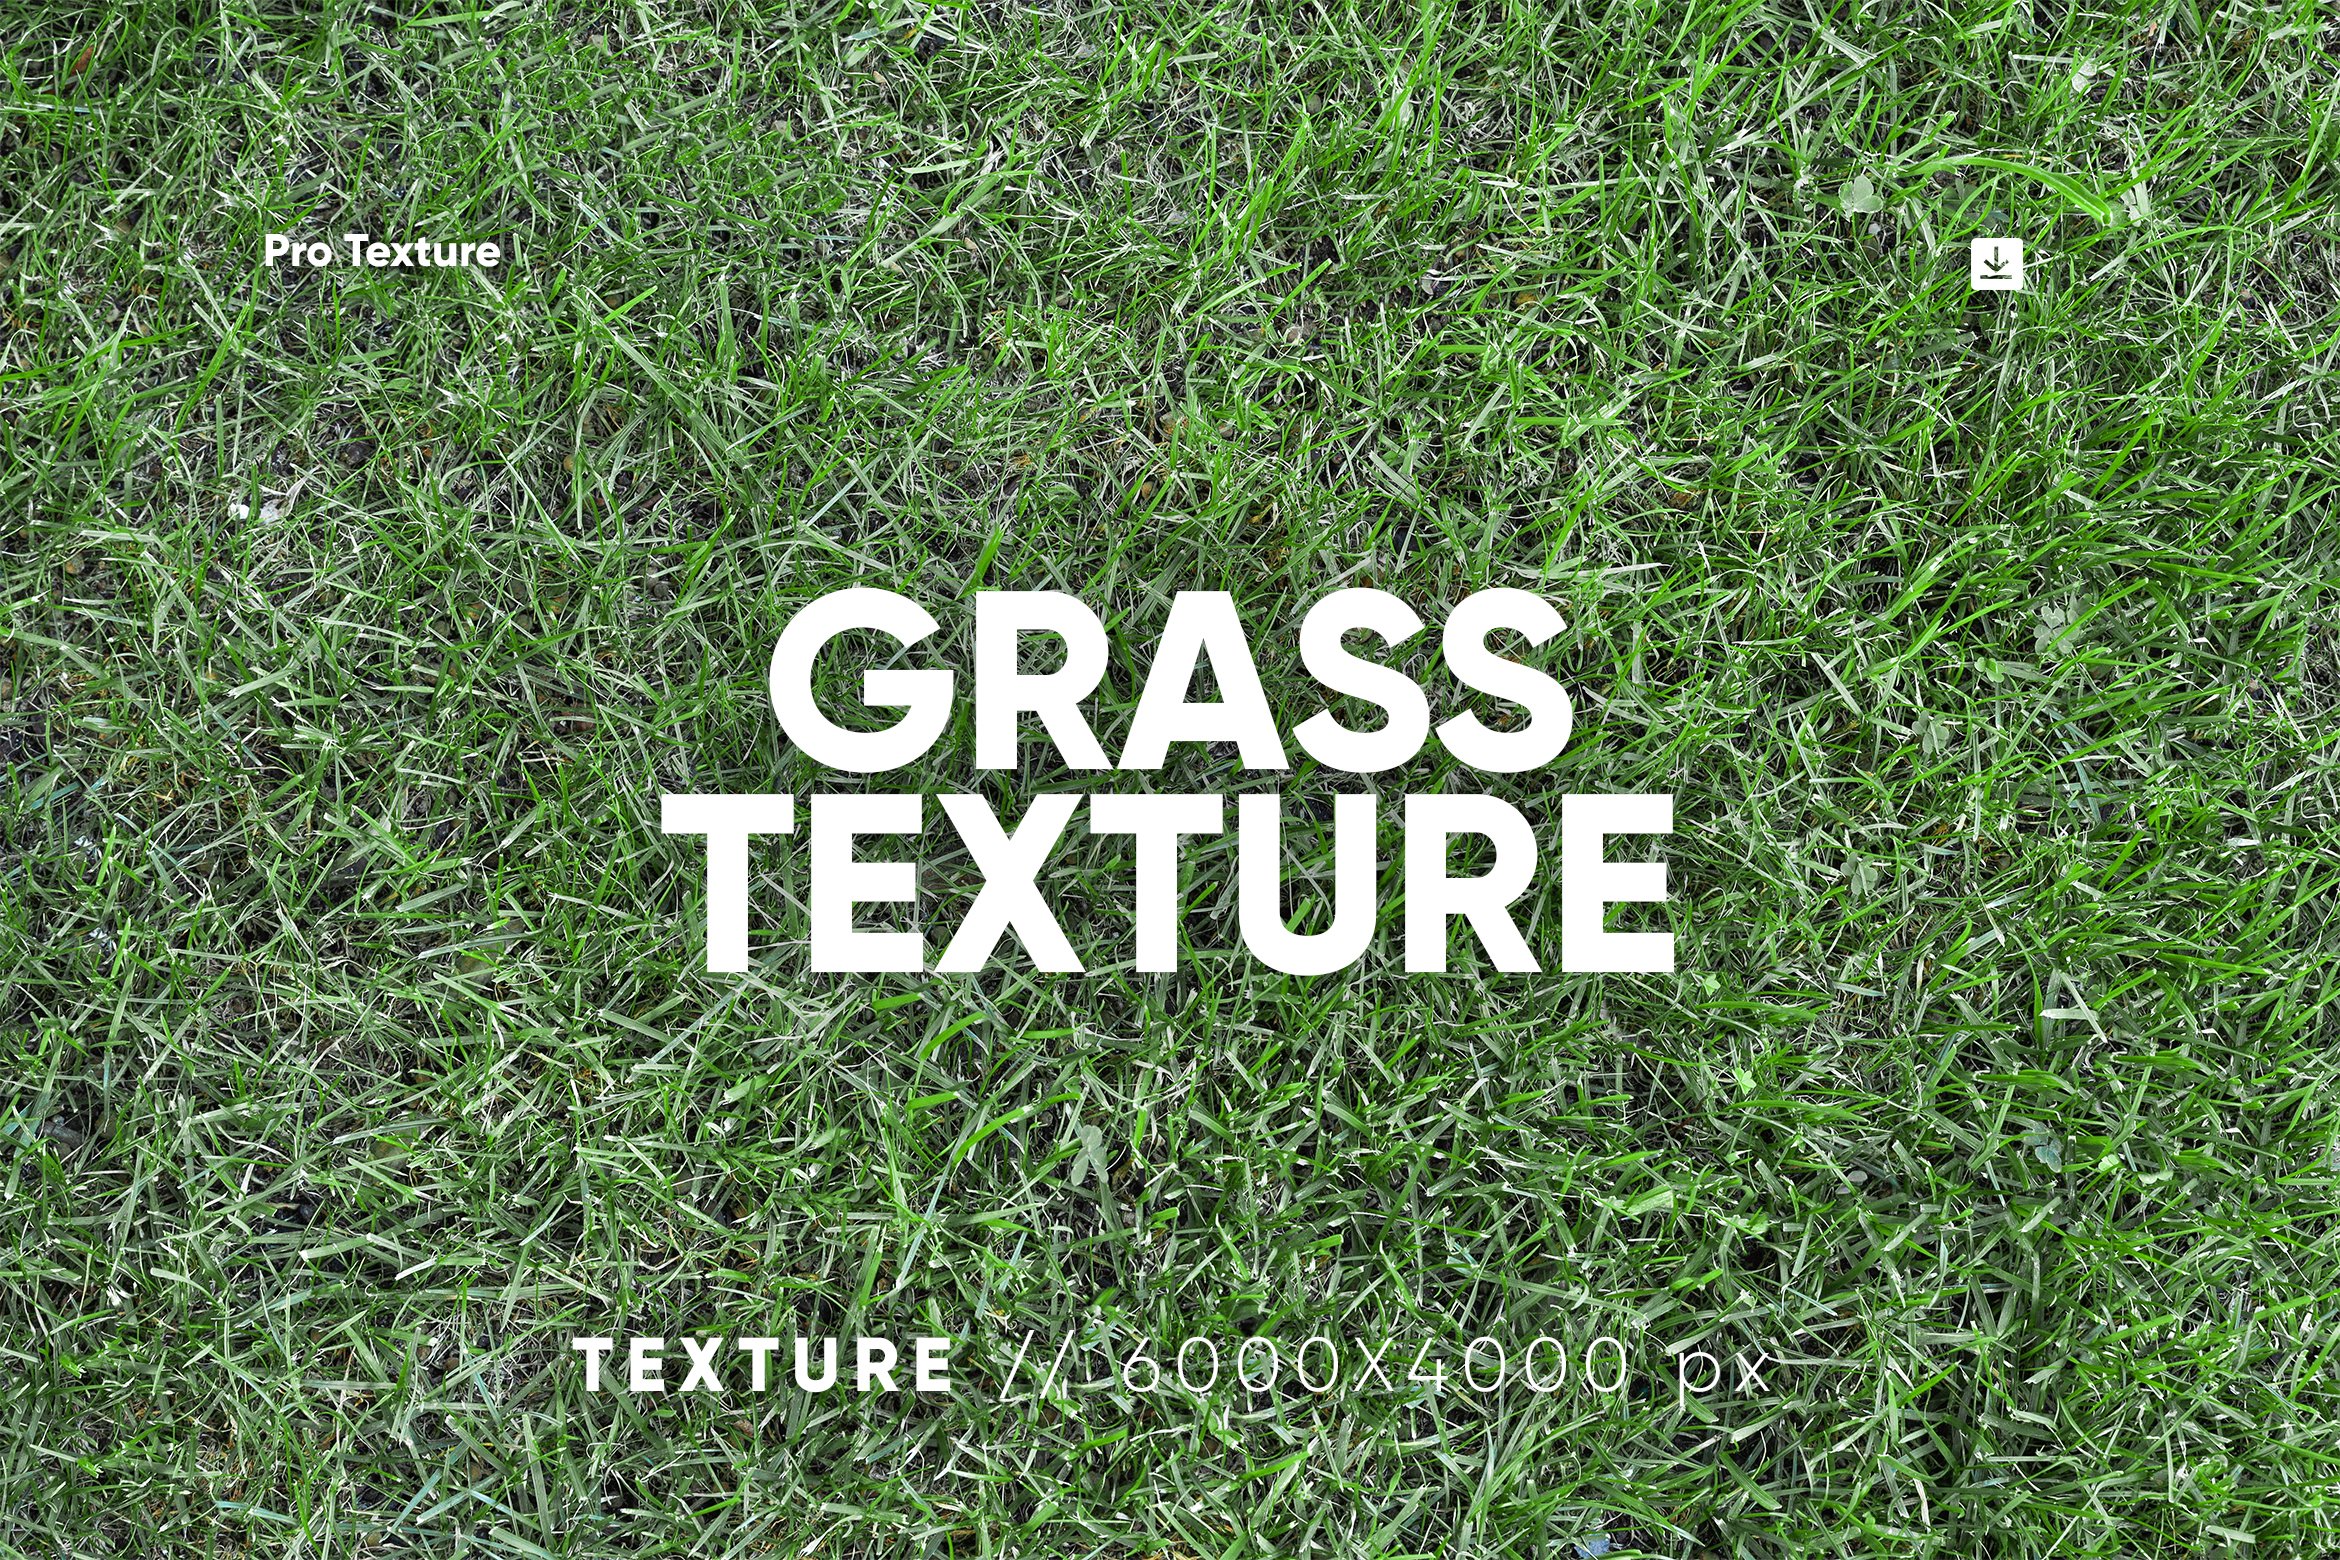 20 Grass Textures HQ cover image.